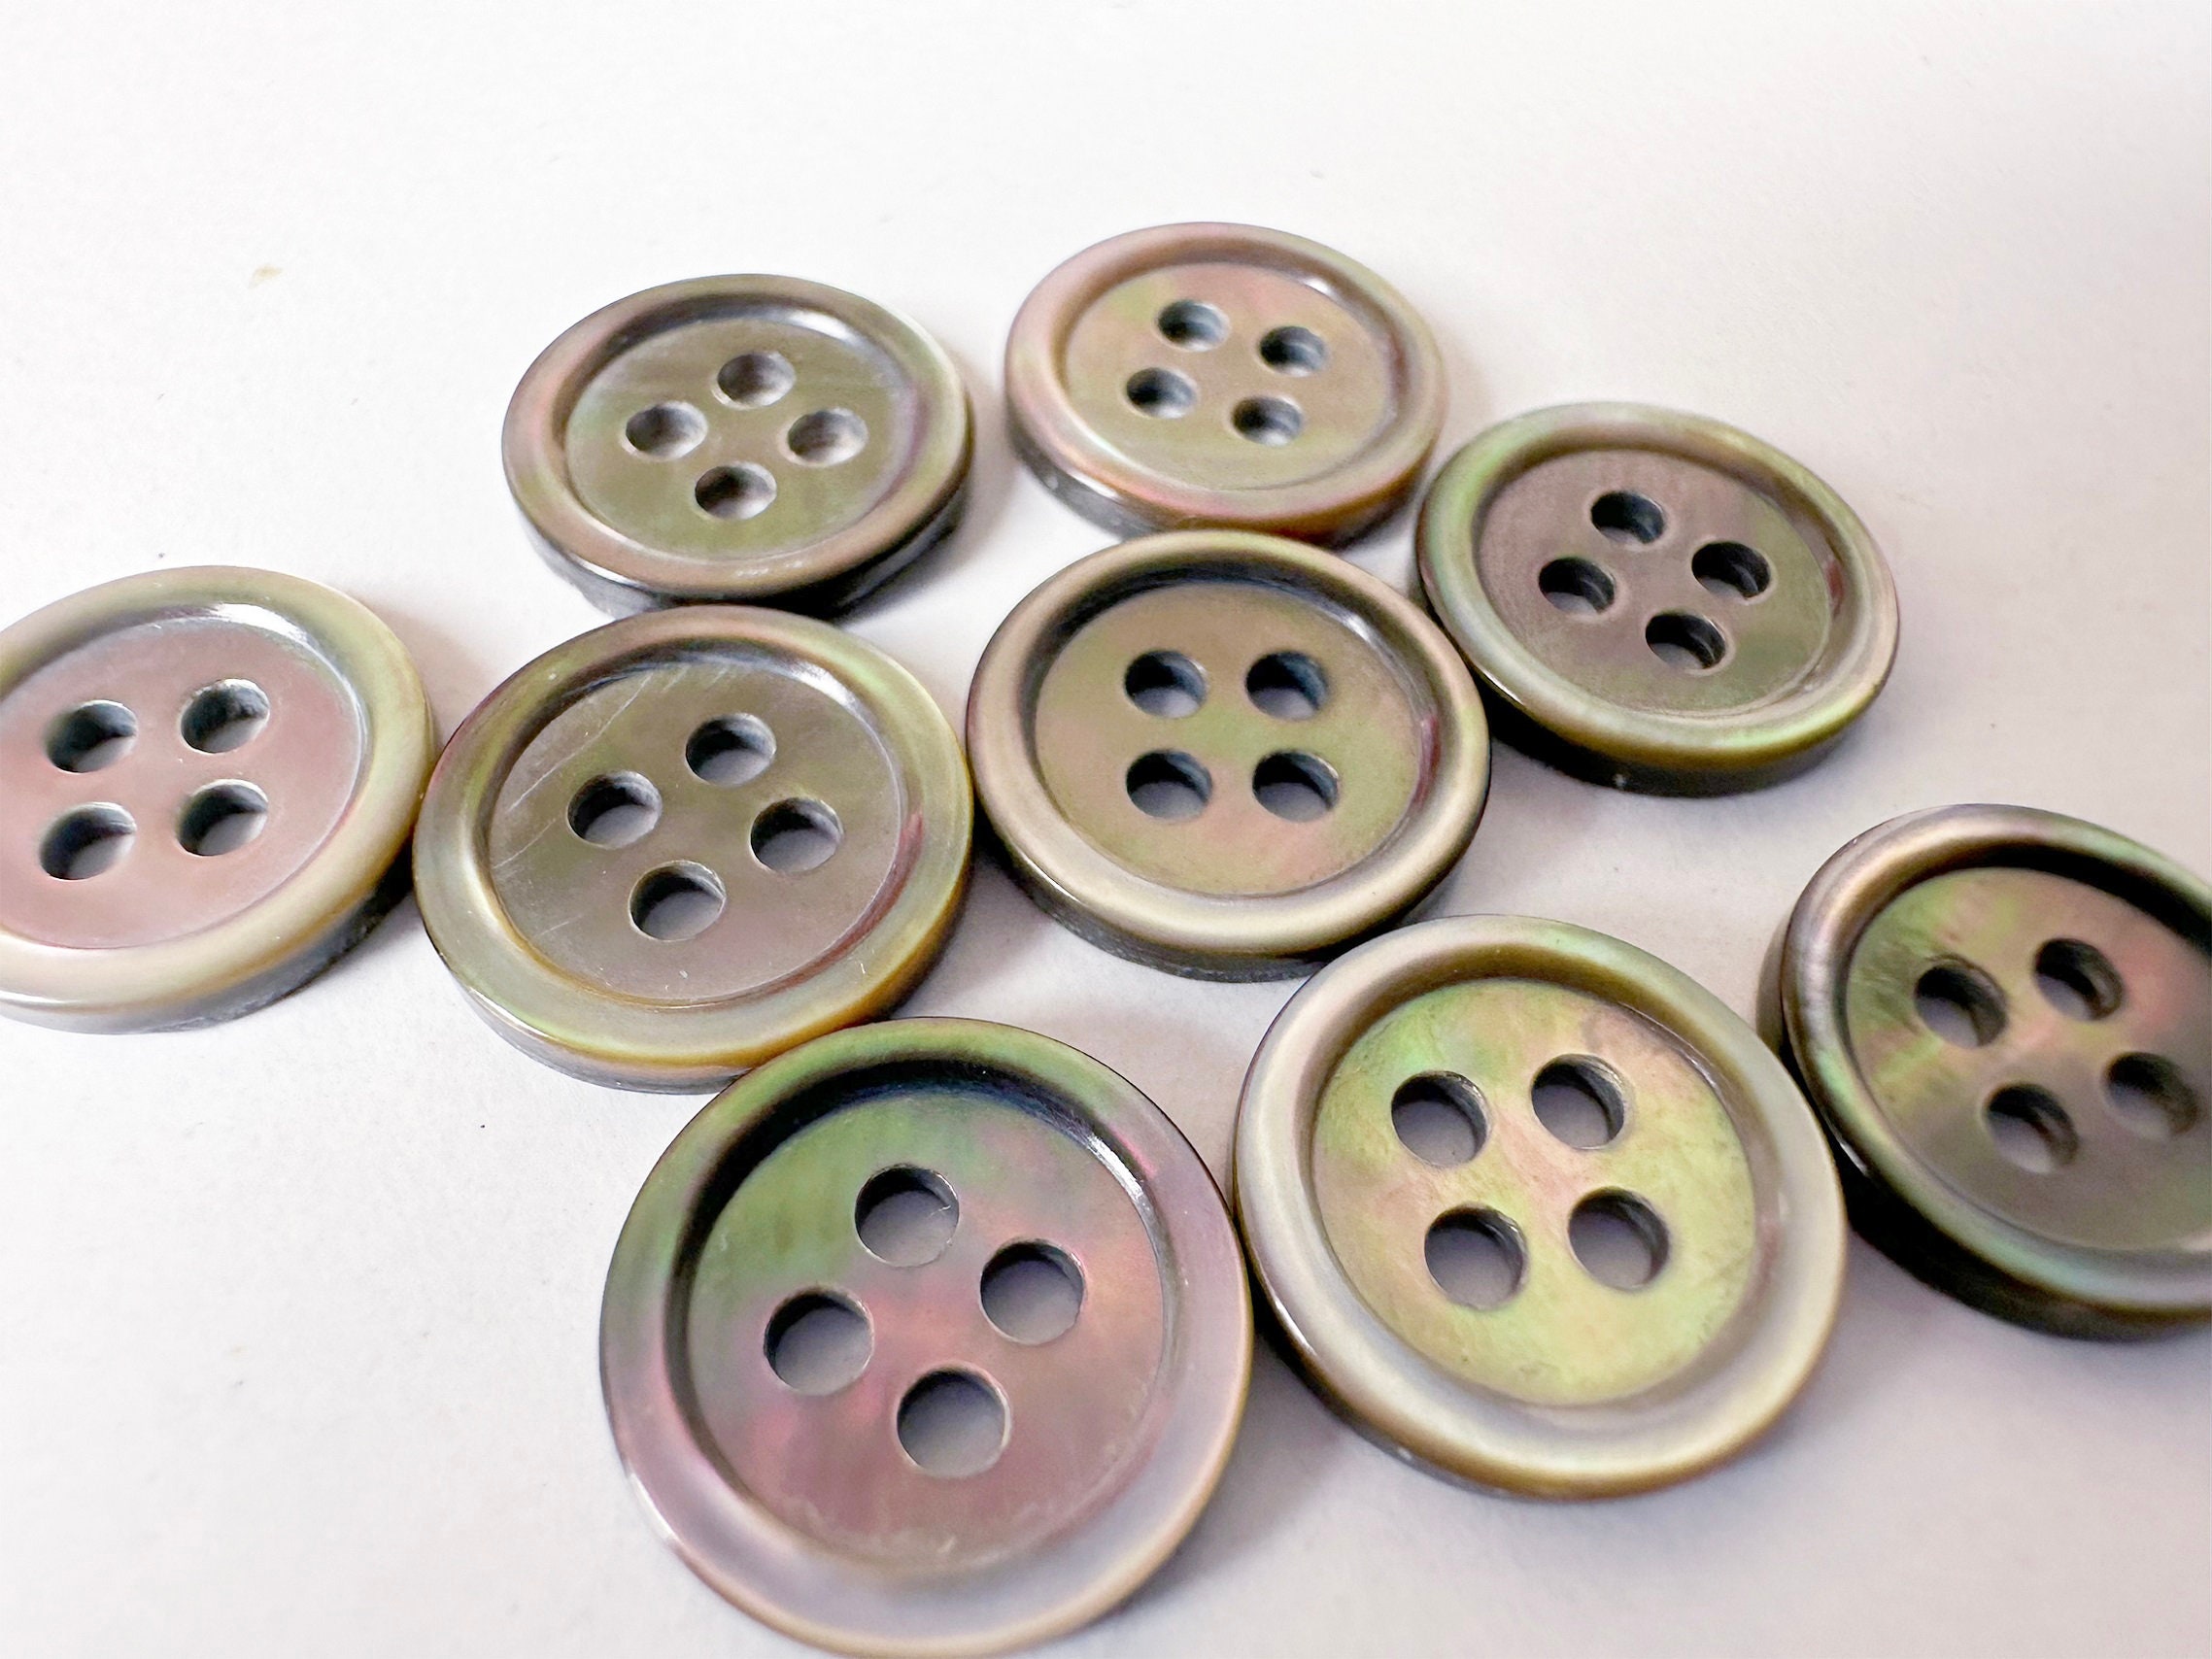 50 Clear Four Holes Buttons, Transparent, Invisible Buttons, 10mm, 12mm,  15mm, 20mm, 25mm, Small to Large Size, 1inch, Smooth Edge, Glossy 